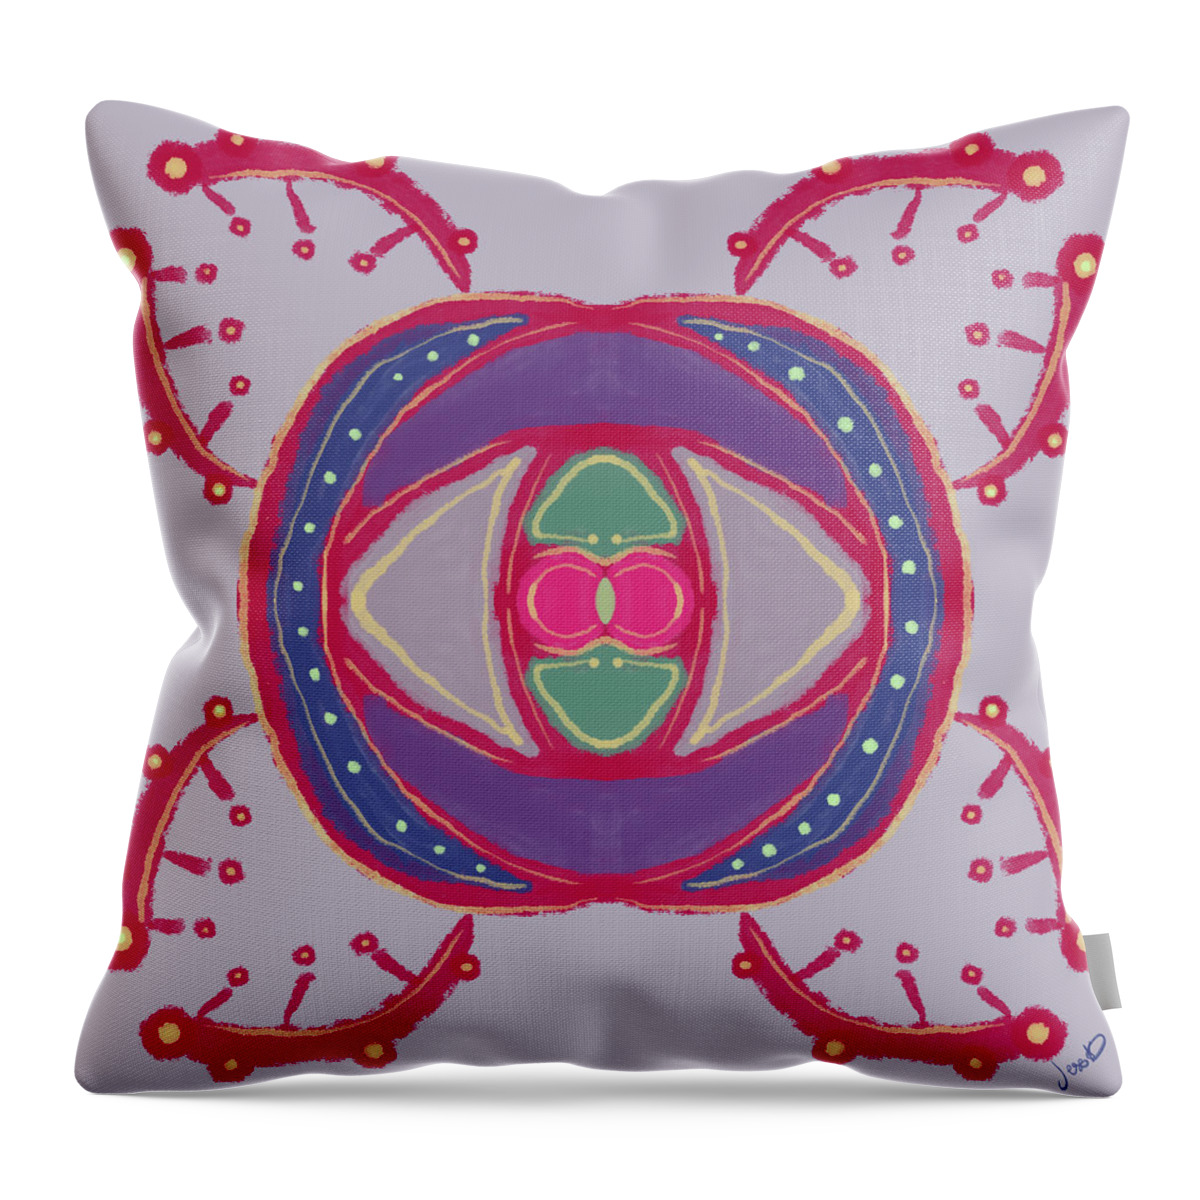 Abstract Throw Pillow featuring the digital art Ojo De Cryptoc by The Dreamer's Outlet